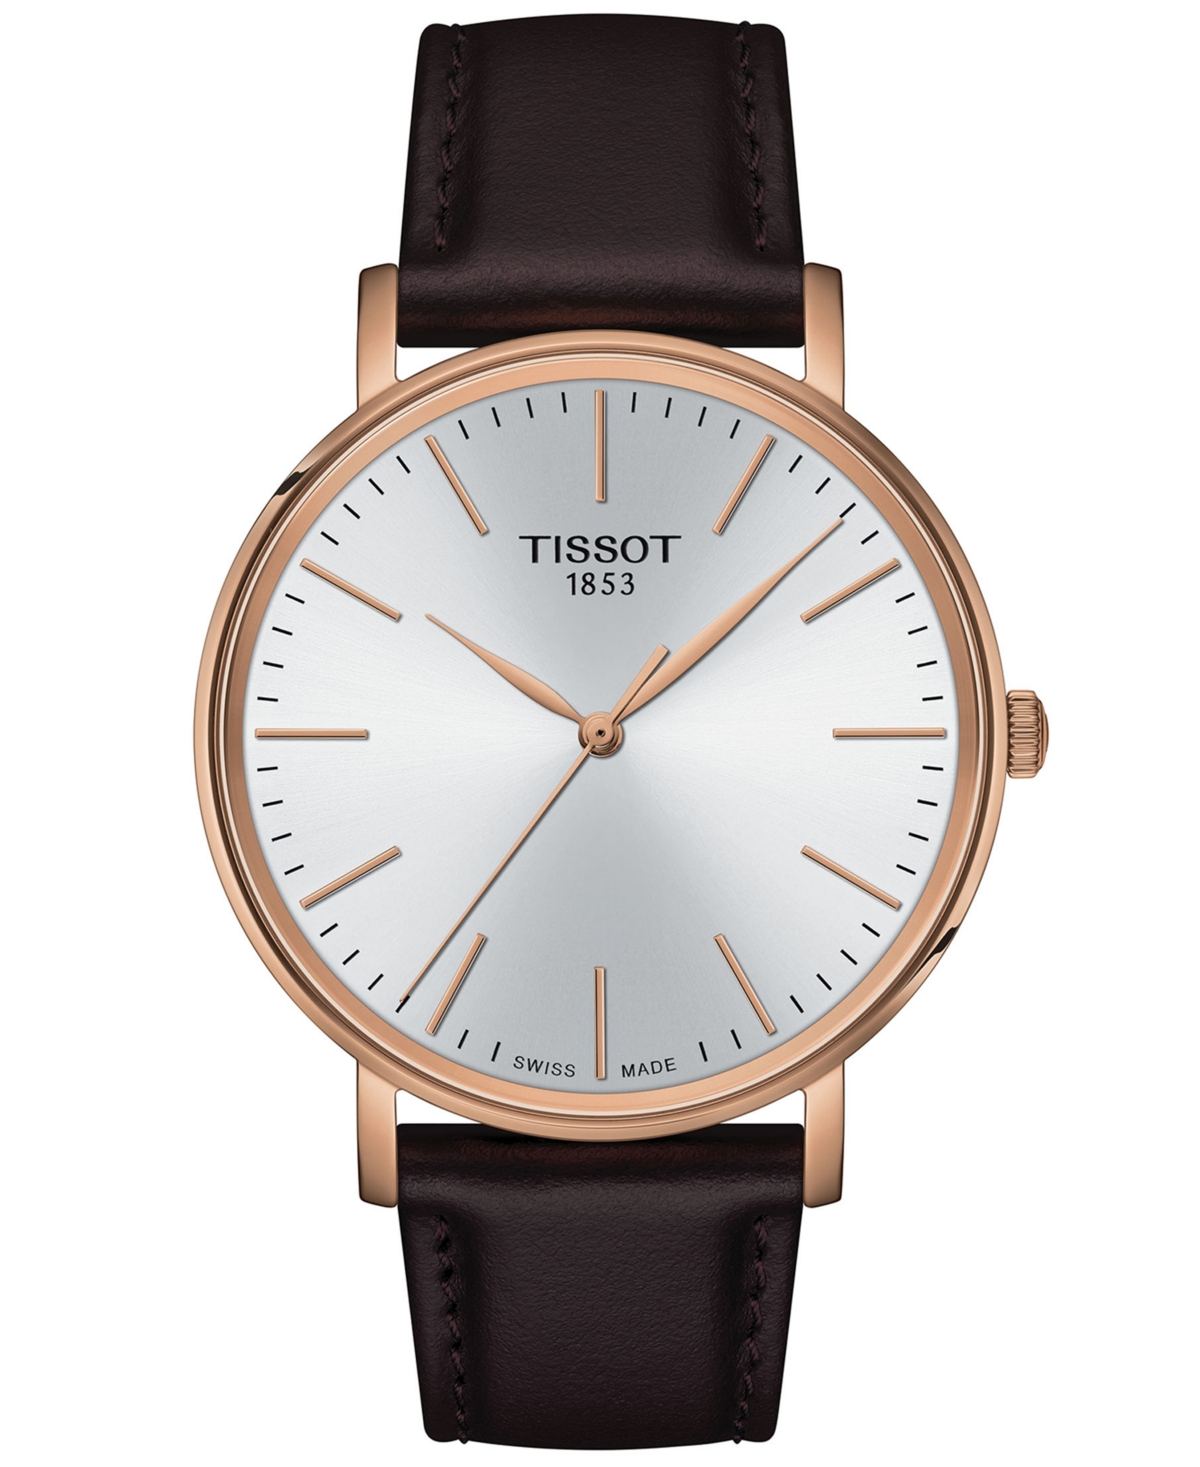 Tissot Men's Swiss Everytime Brown Leather Strap Watch 40mm